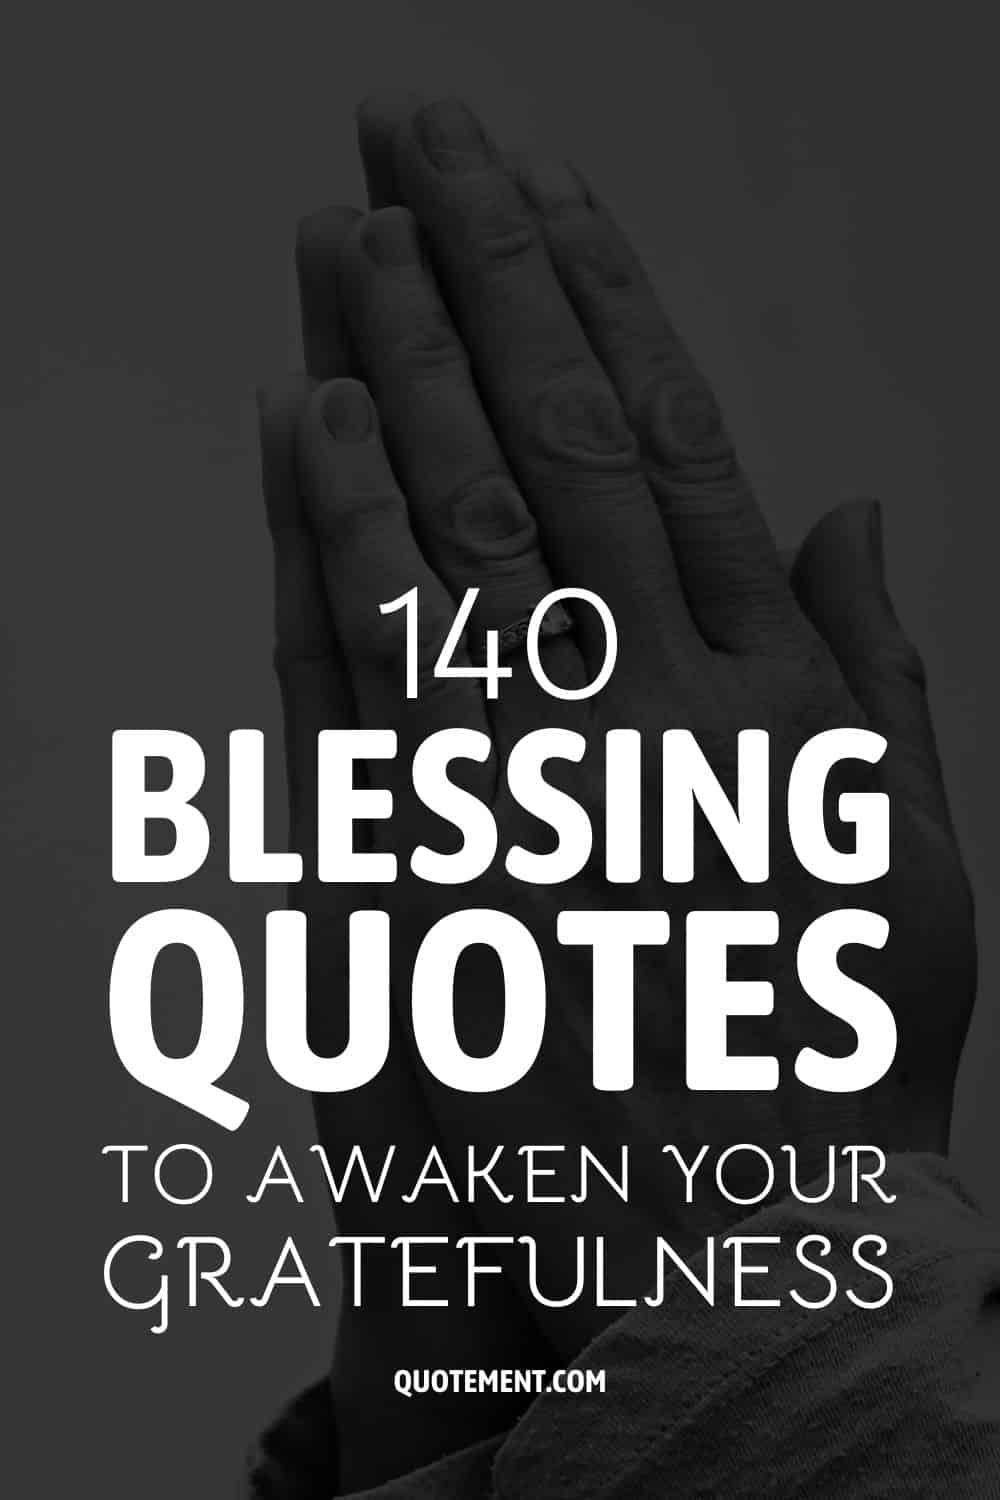 140 Blessing Quotes To Awaken Your Gratefulness 